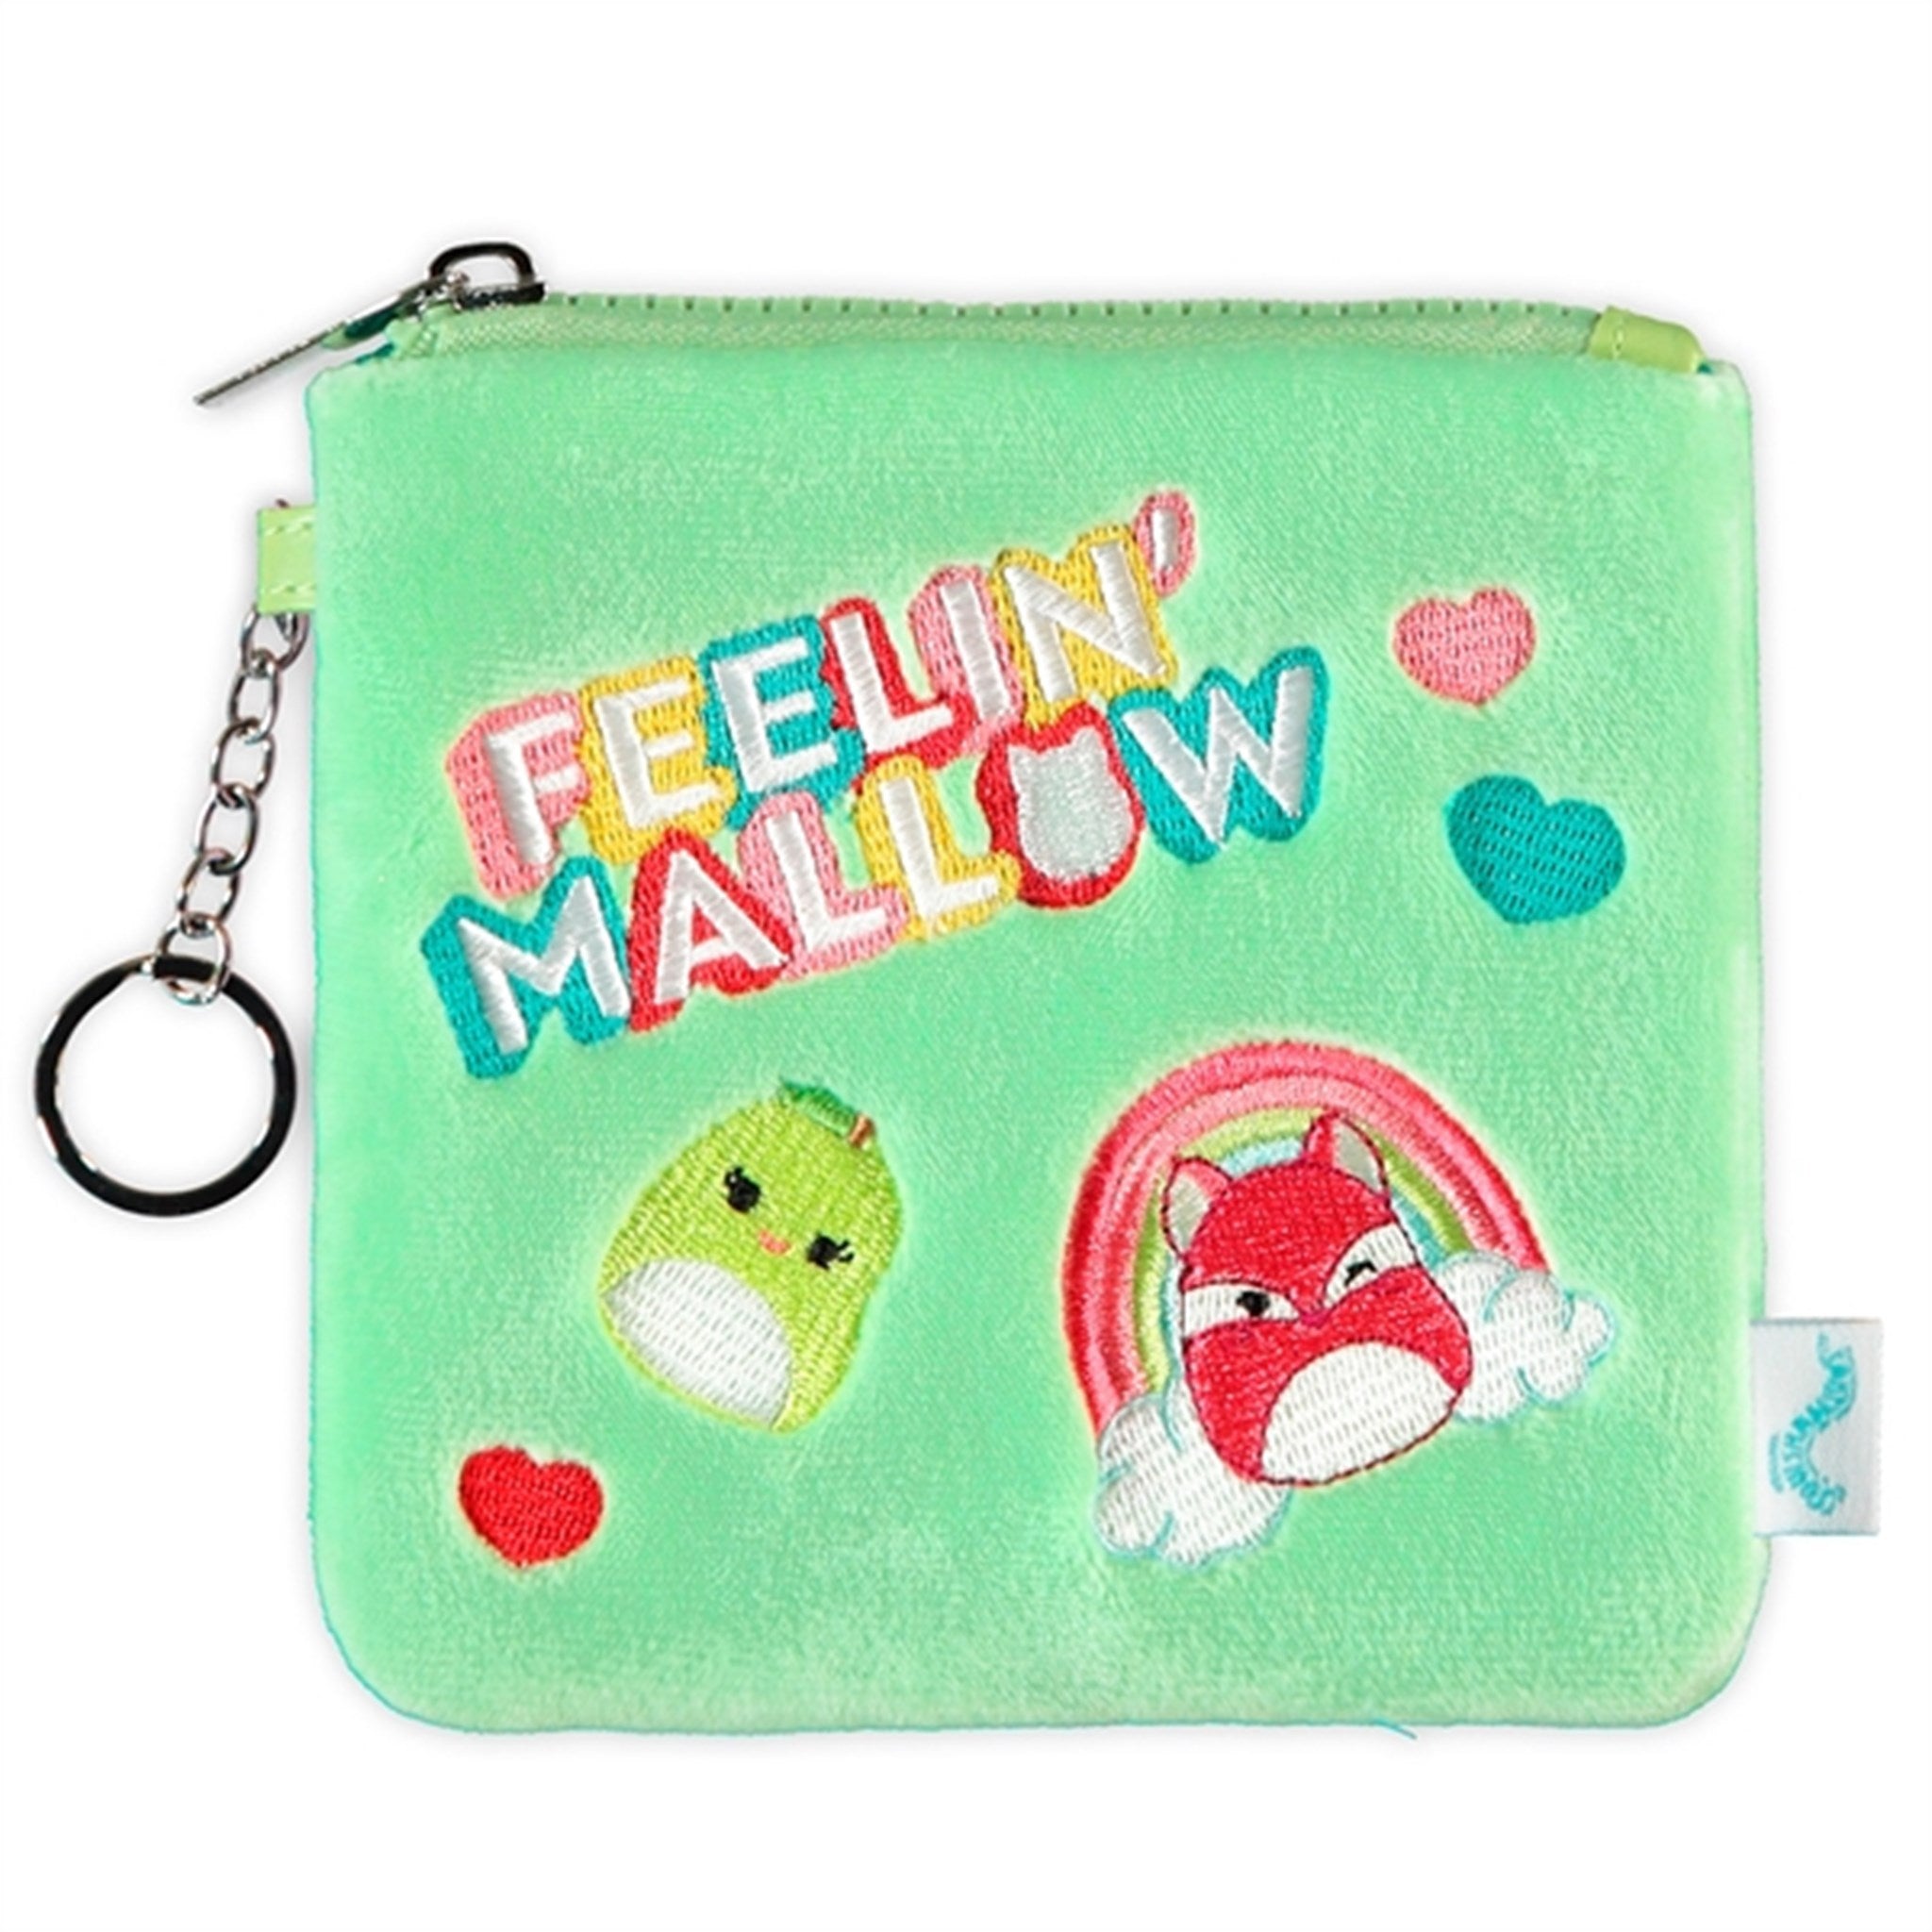 Squishmallows Wallet Green